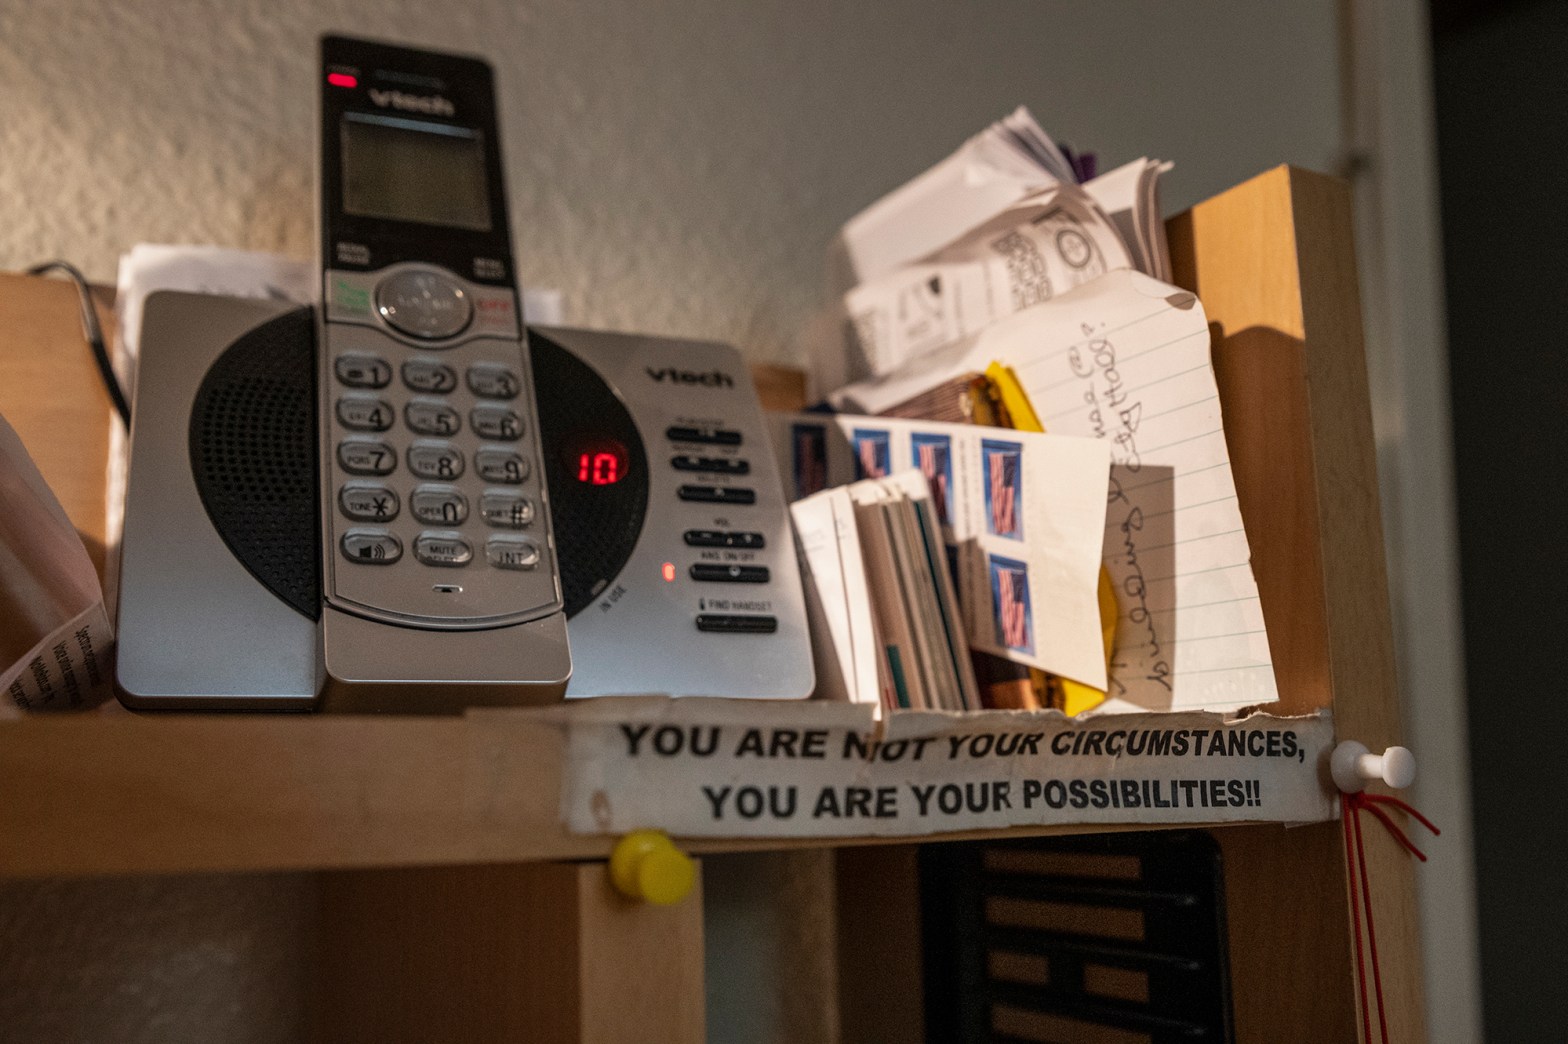 A phone on a shelf with a note that says "YOU ARE NOT YOU CIRCUMSTANCES, YOU ARE YOUR POSSIBILITIES!!